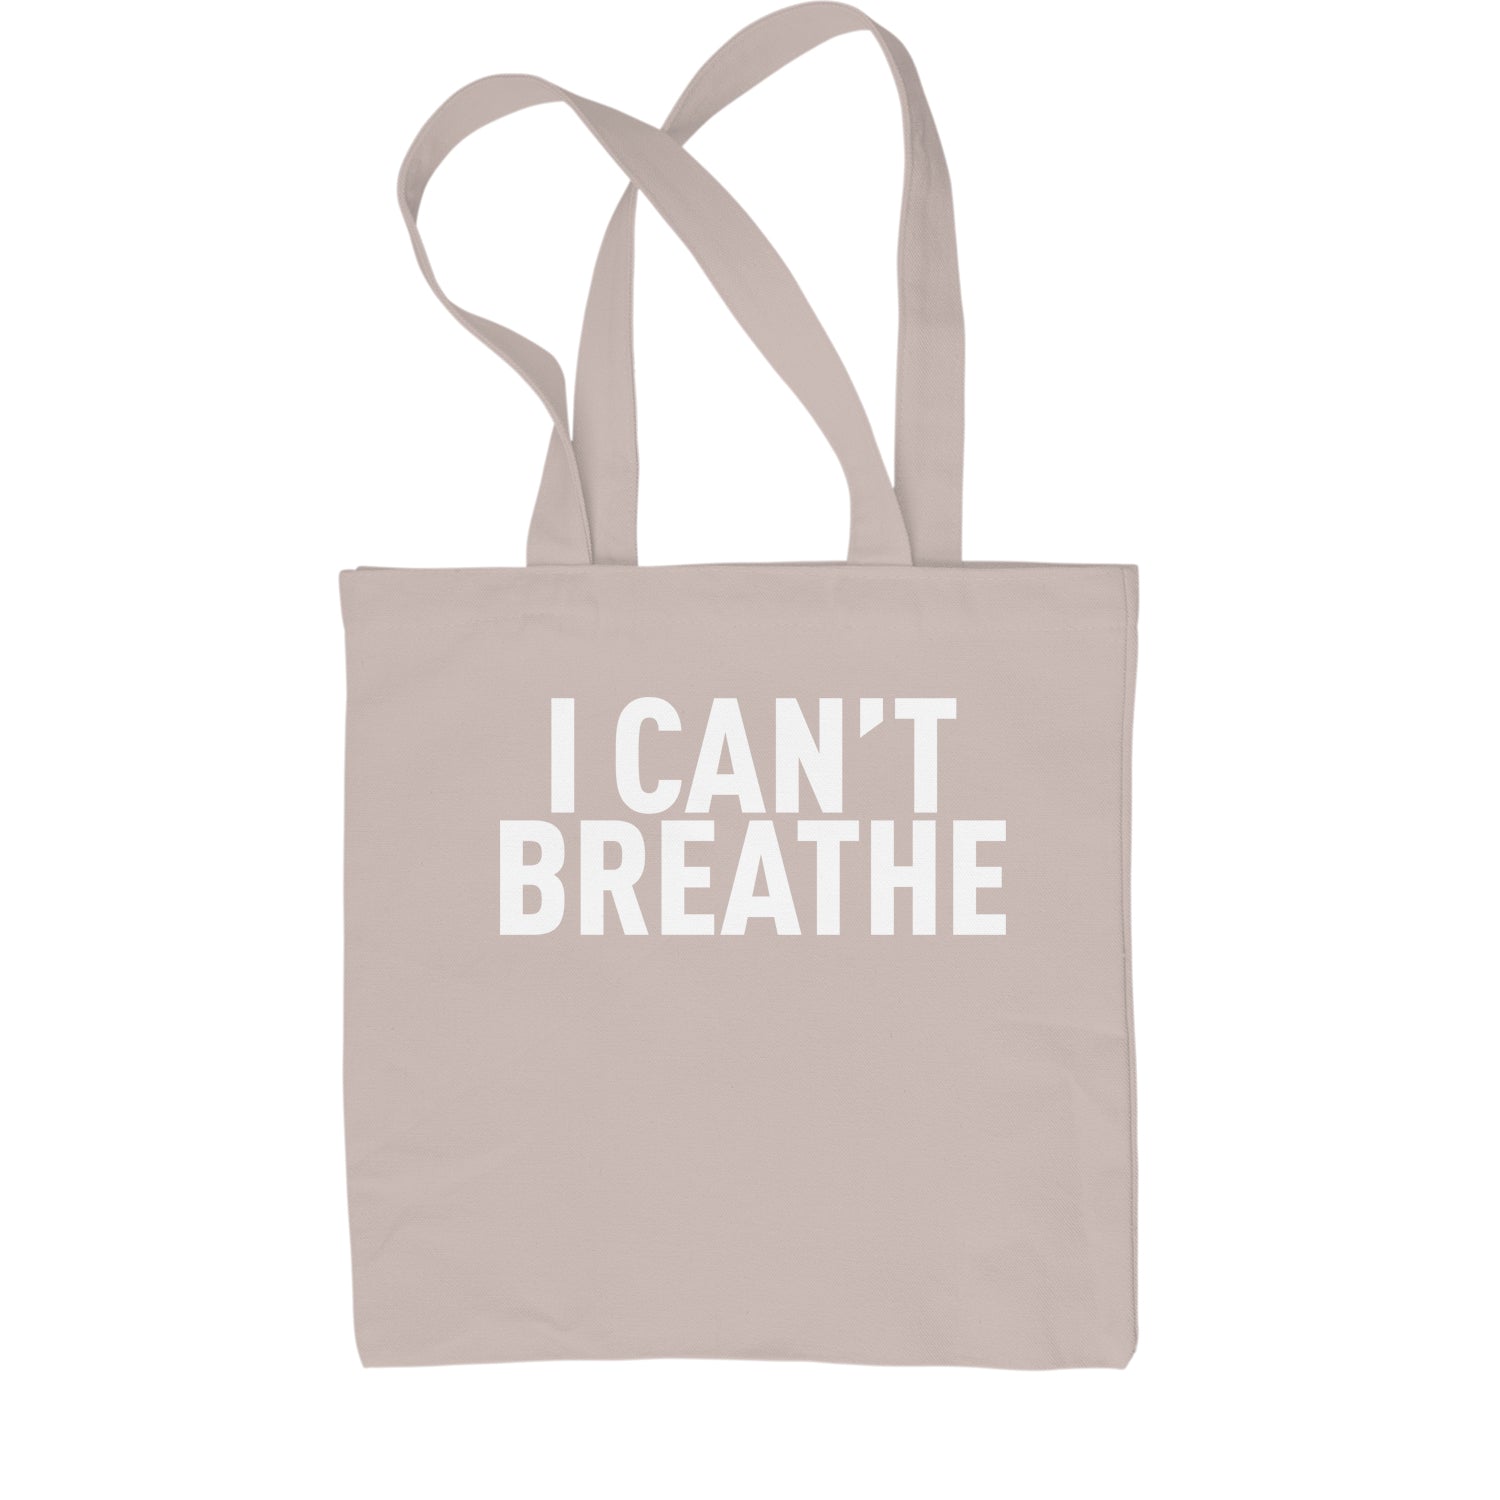 I Can't Breathe Social Justice Shopping Tote Bag african, africanamerican, american, black, blm, breonna, floyd, george, life, lives, matter, taylor by Expression Tees